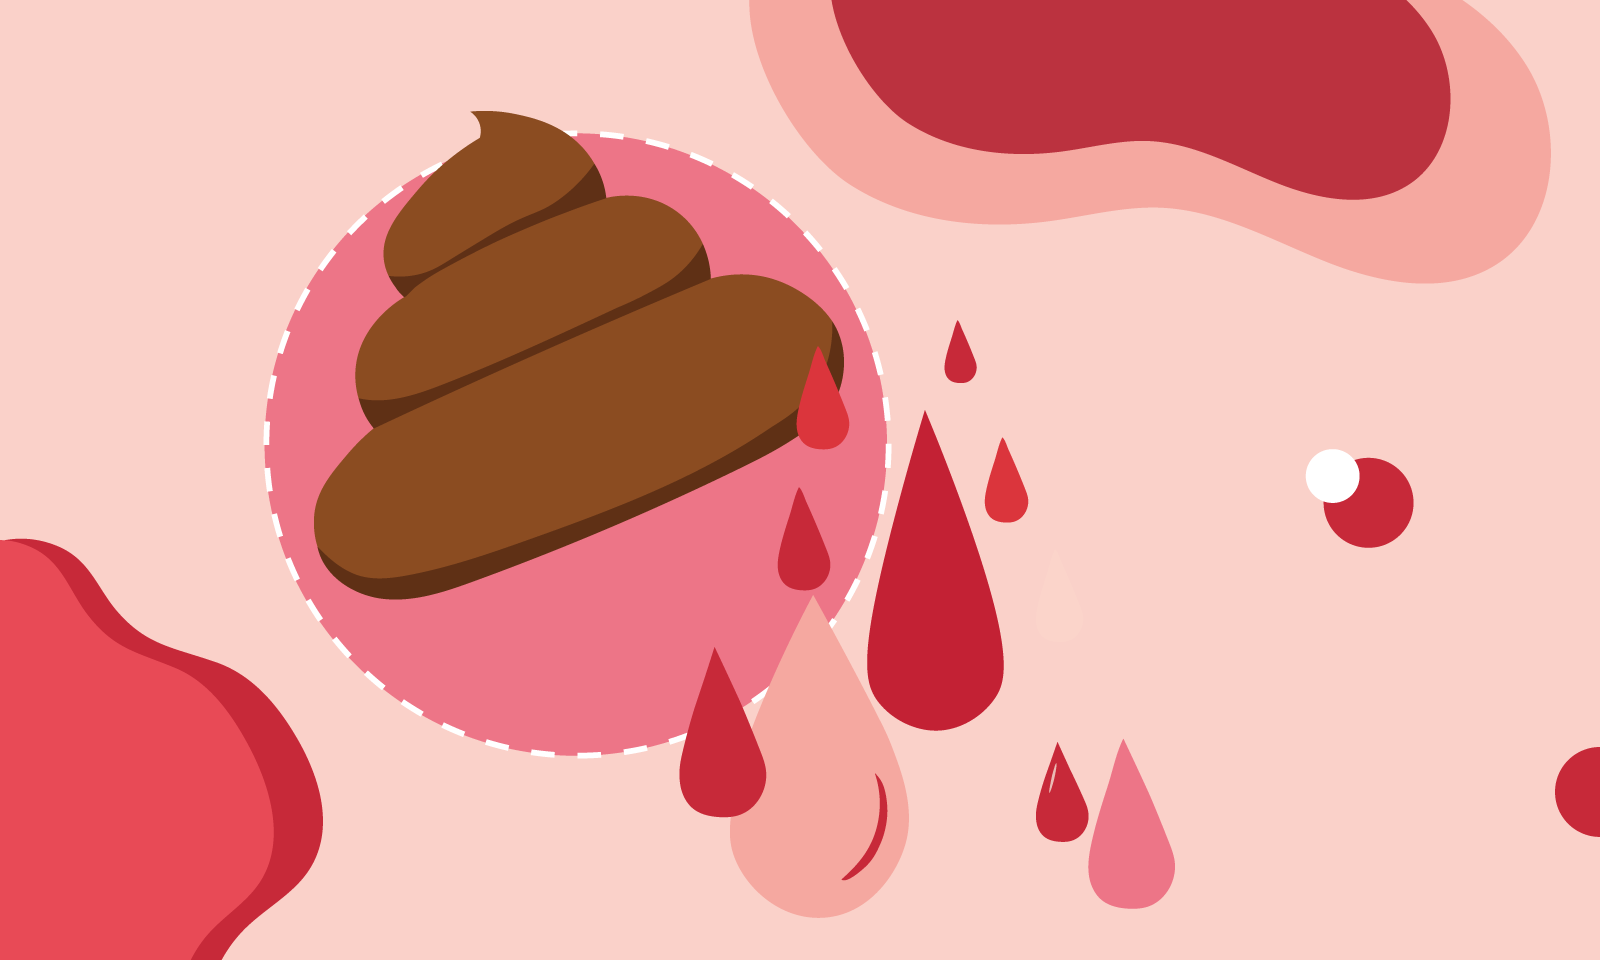 Fun illustration explaining changes in poop during your period.